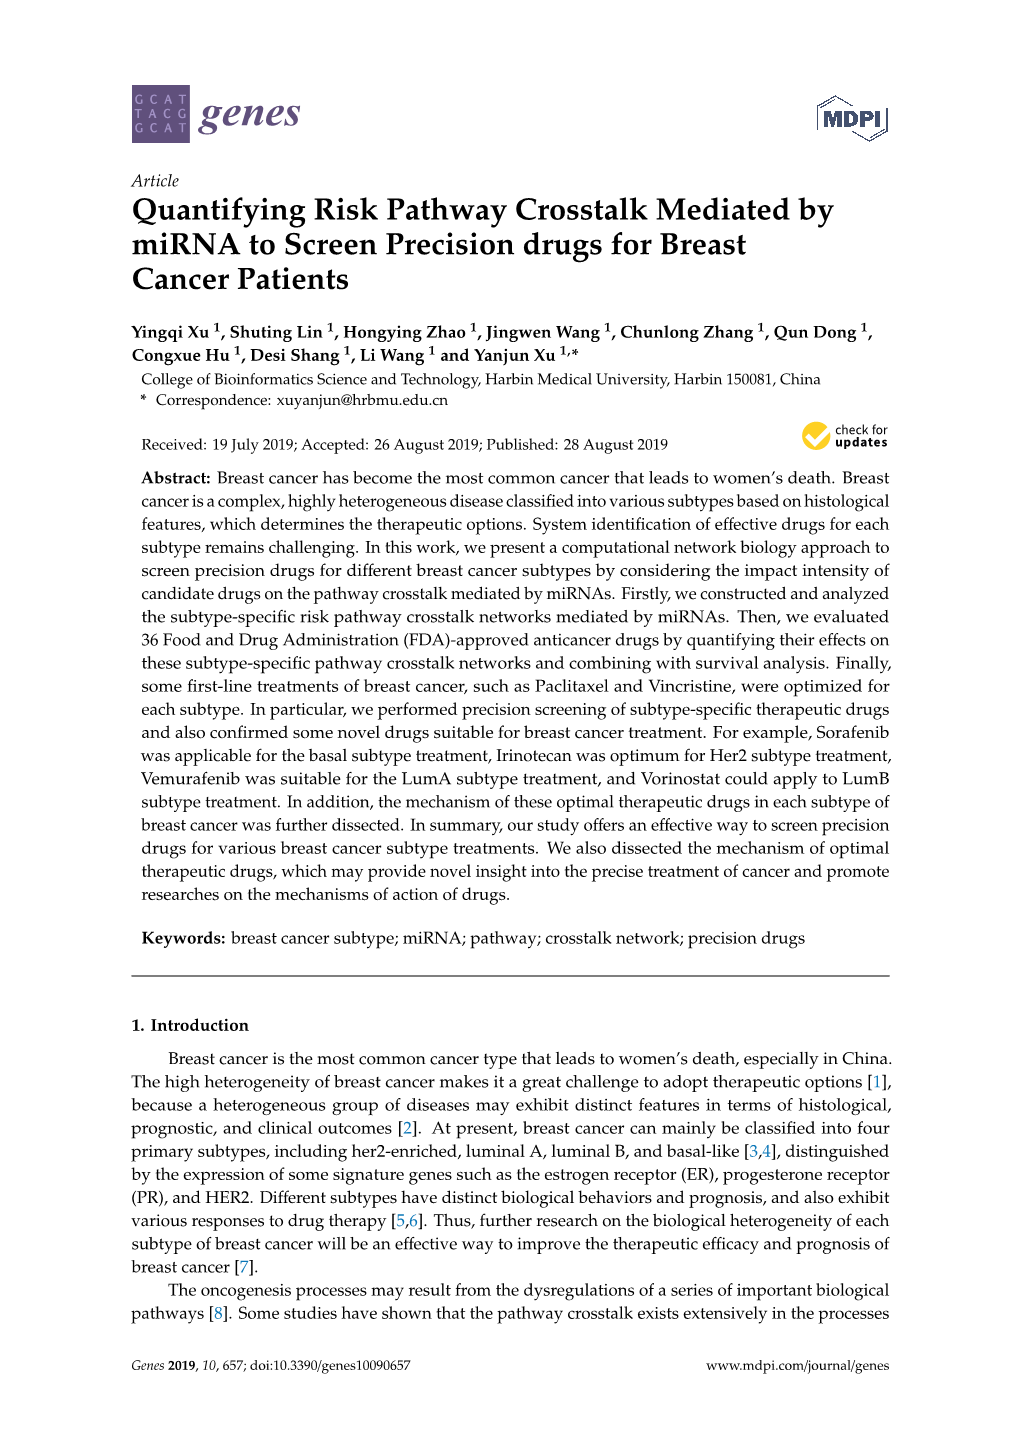 Quantifying Risk Pathway Crosstalk Mediated by Mirna to Screen Precision Drugs for Breast Cancer Patients